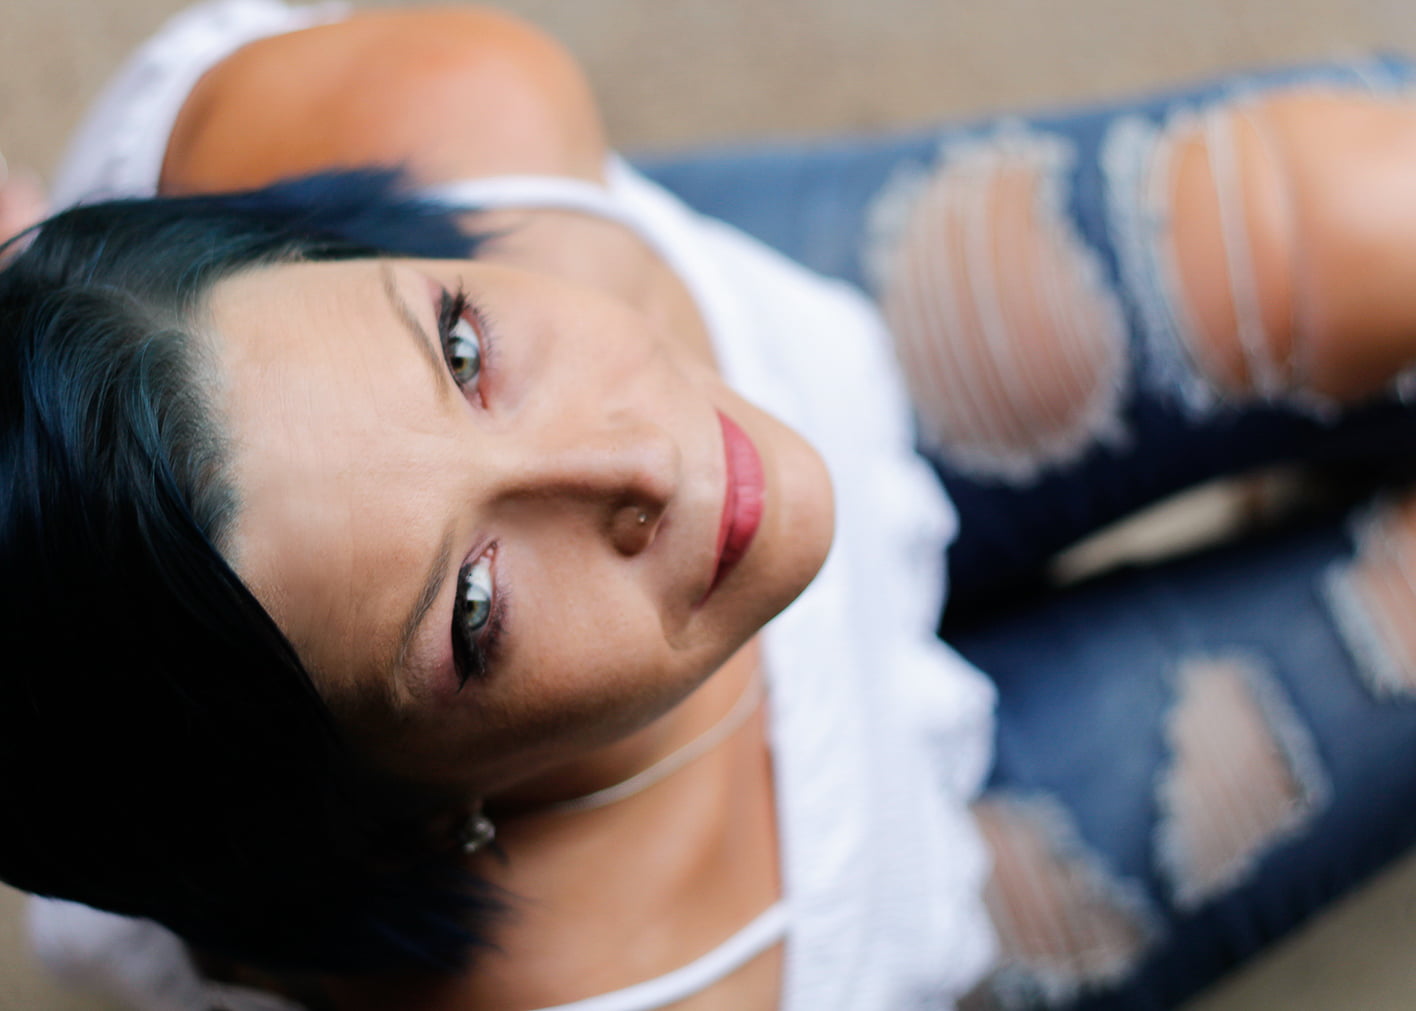 Woman with blue hair looking up with ripped jeans and white shirt